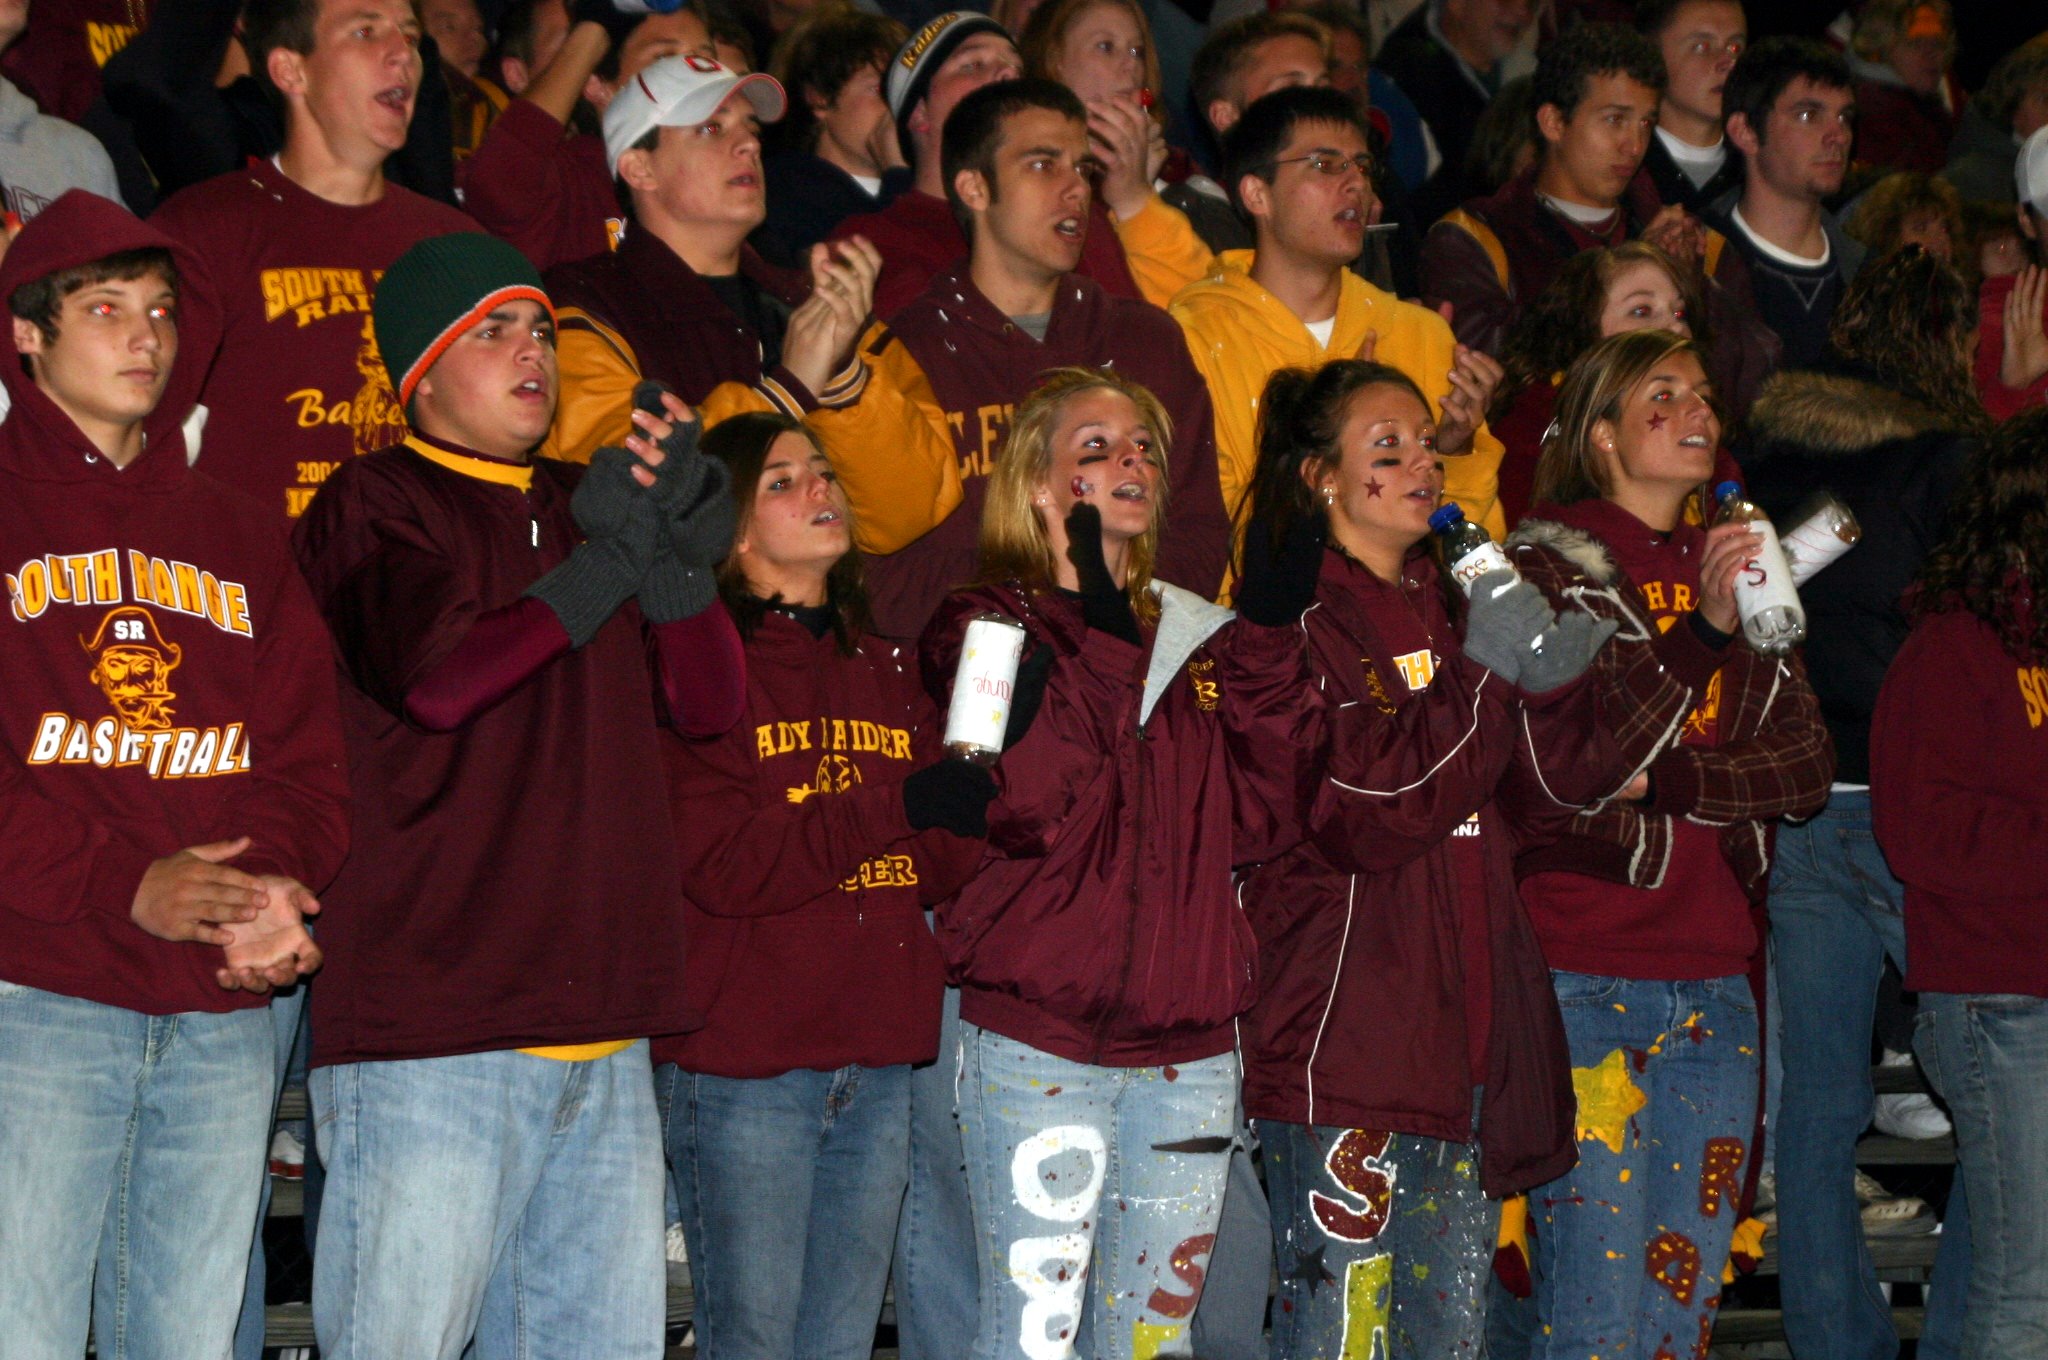 South Range students cheer the Raiders onto a victory over Columbiana.